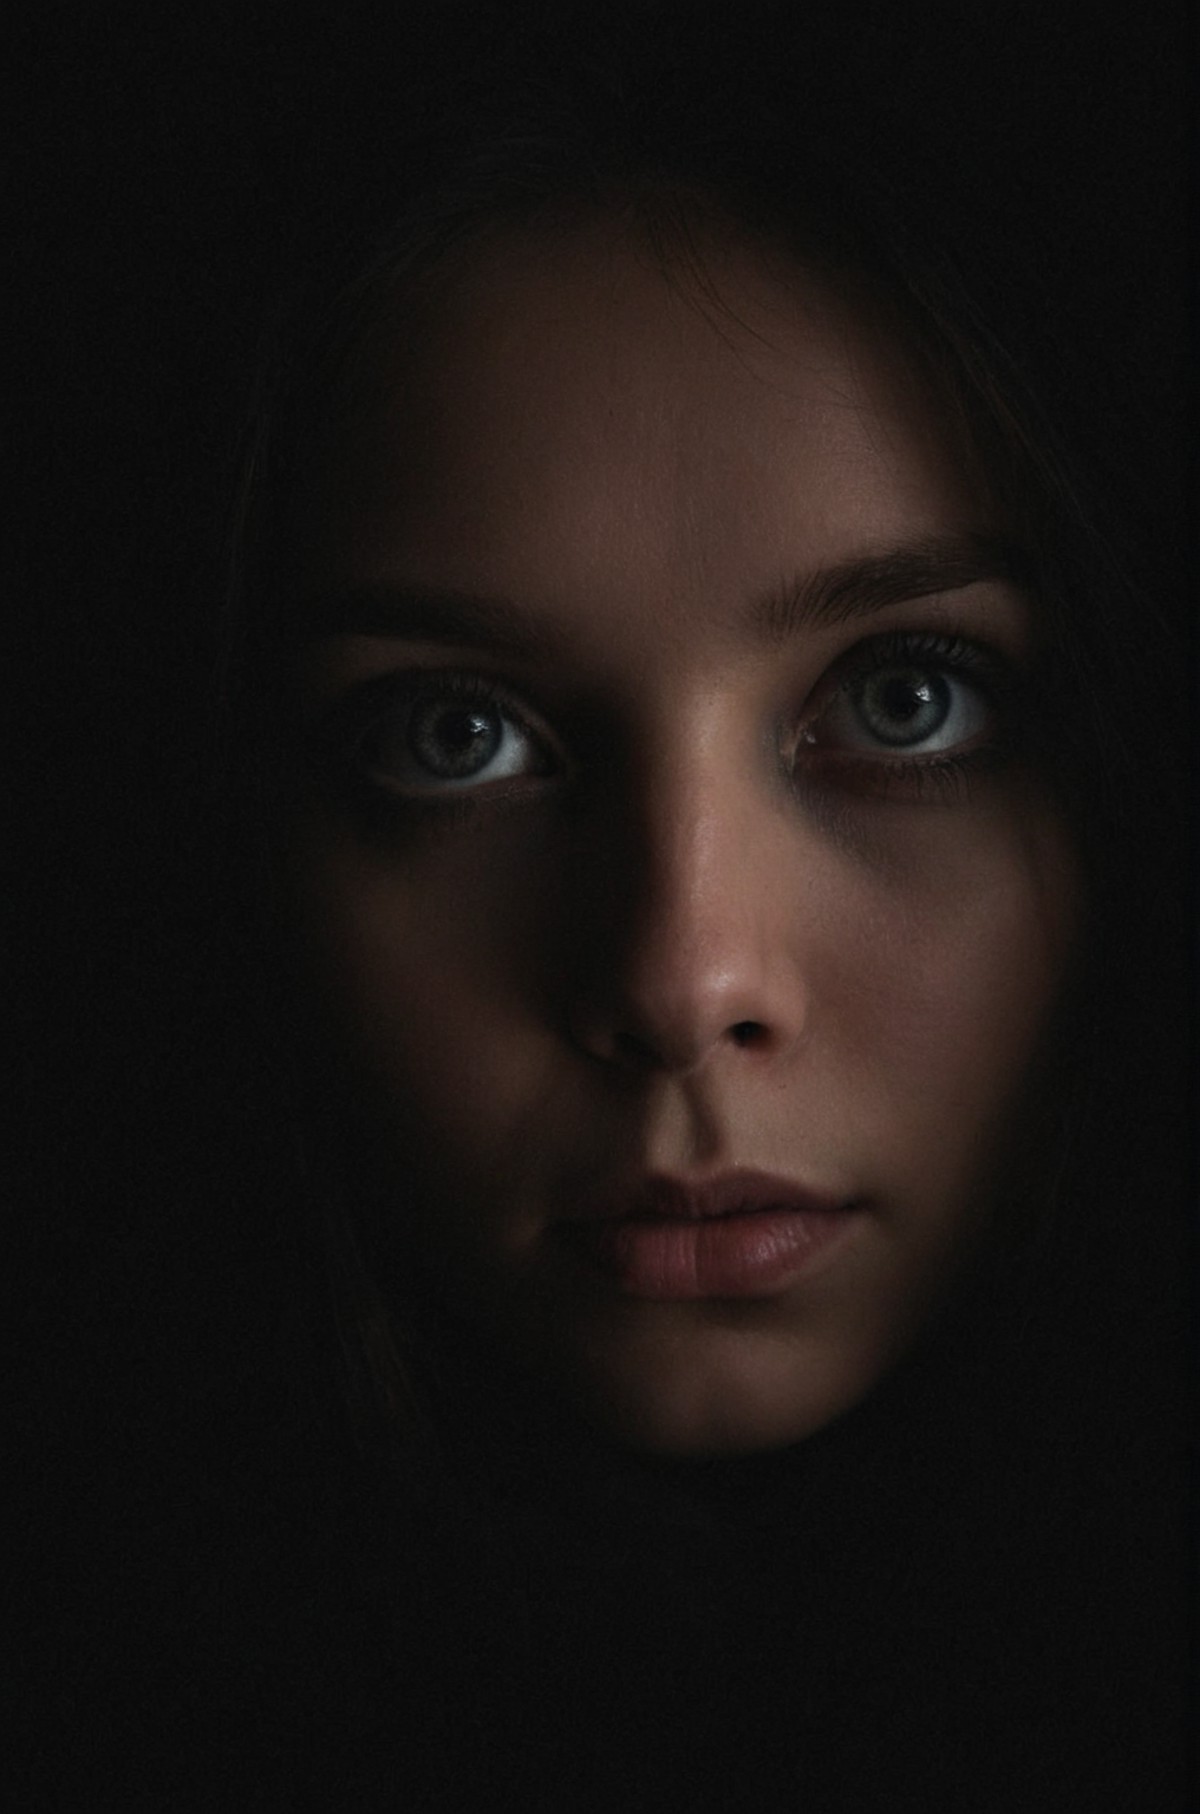 cozy lighting, dark background, portrait, unusual composition, use of negative space, spectral, eye close-up